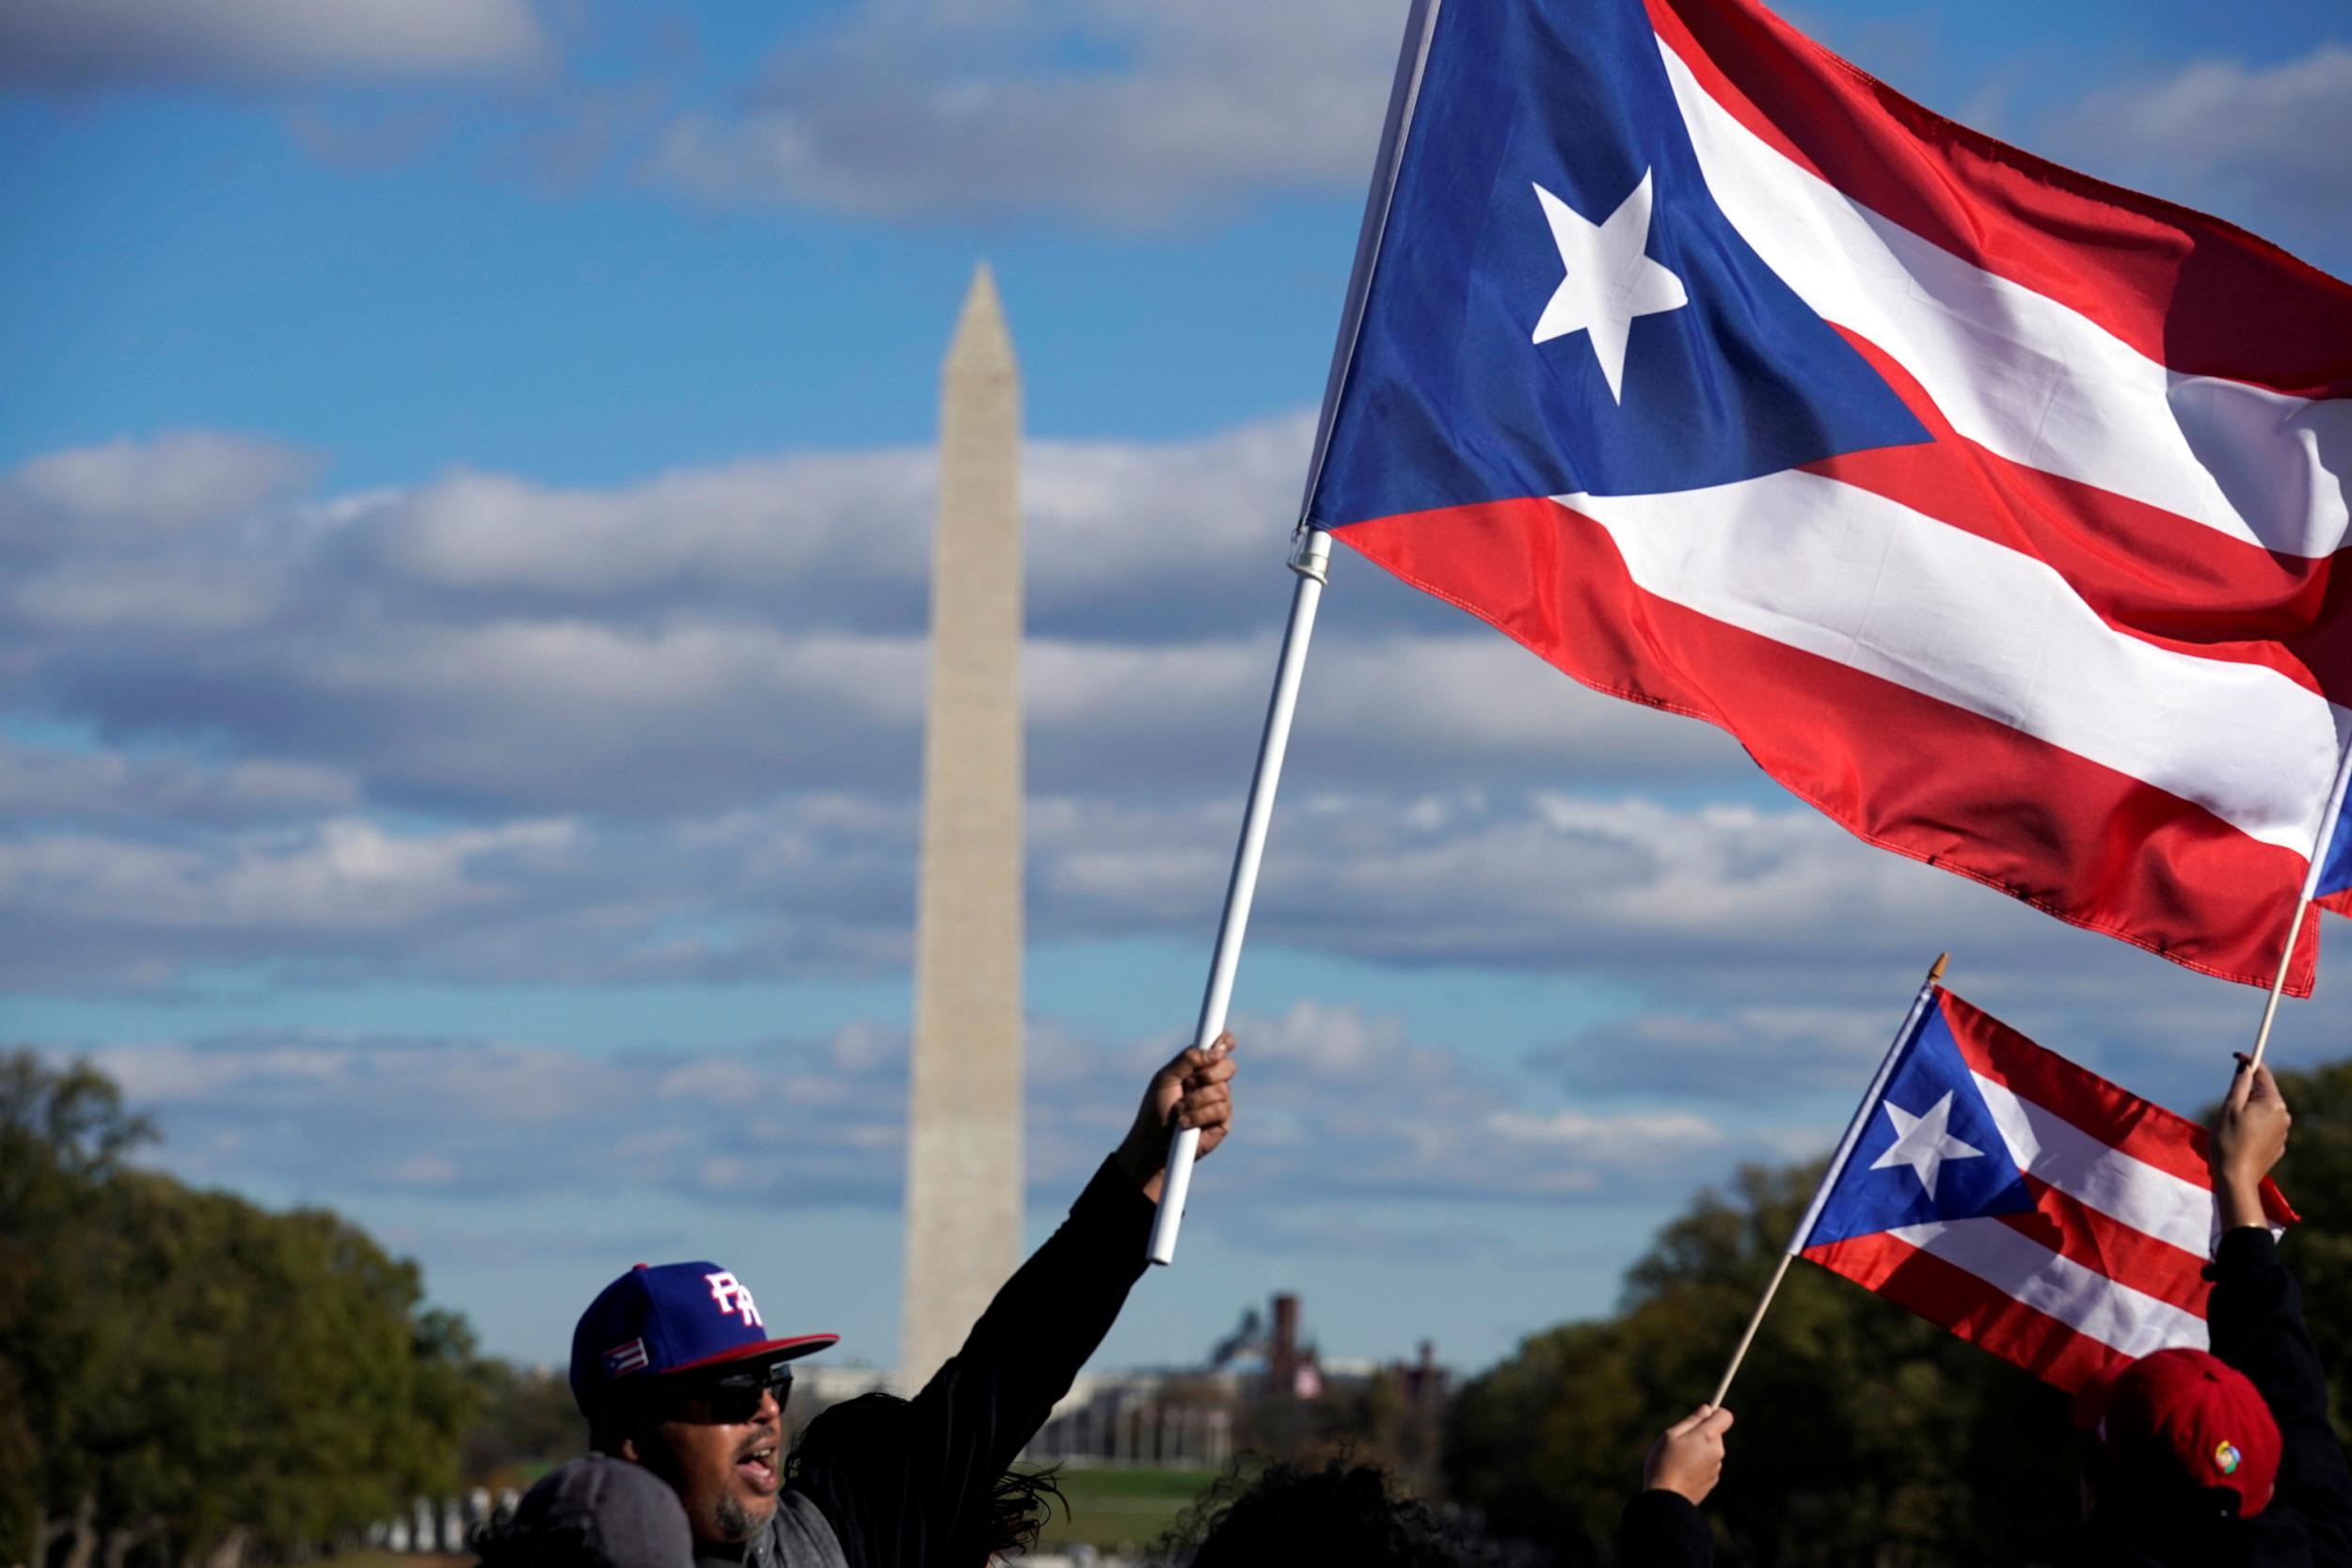 People wave Puerto Rican flags at the Unity March to highlight the ongoing humanitarian and natural disaster crisis in Puerto Rico, at the Lincoln Memorial in Washington, U.S., November 19, 2017.